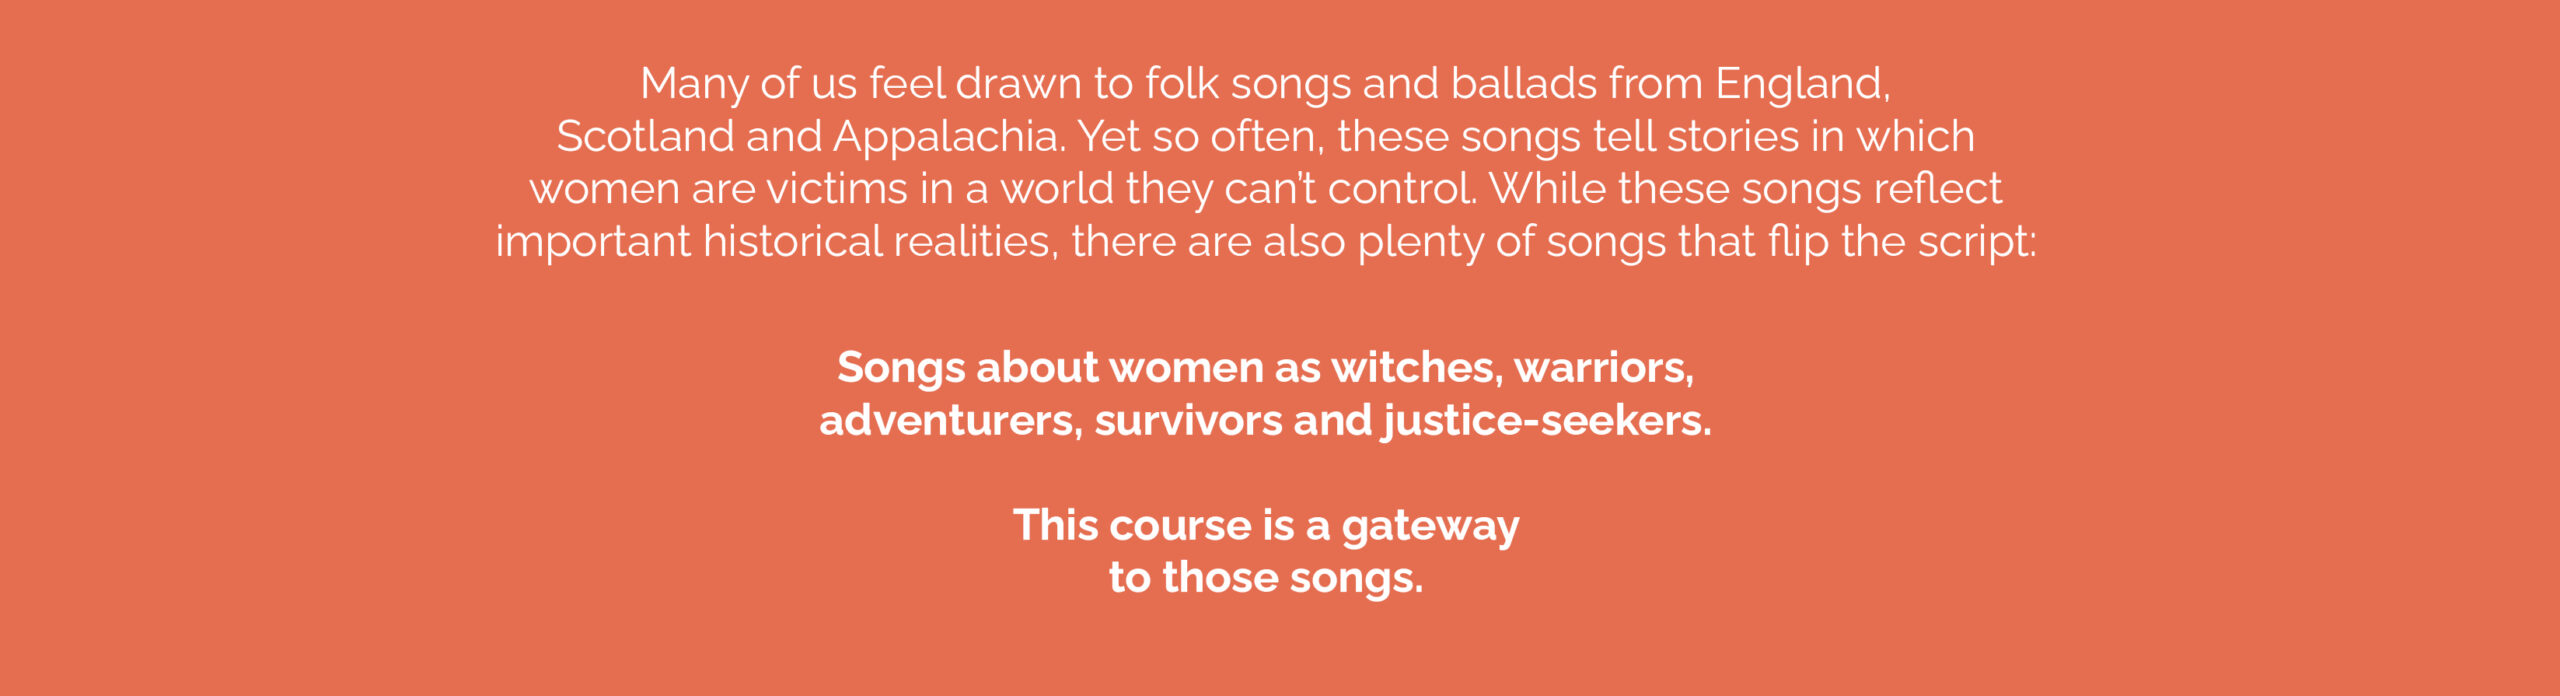 This image has text displayed on an orange field. The text reads: 
Many of us feel drawn to folk songs and ballads from England, Scotland and Appalachia. Yet so often, these songs tell stories in which women are victims in a world they can’t control. While these songs reflect important historical realities, there are also plenty of songs that flip the script:
Songs about women as witches, warriors, adventurers, survivors and justice-seekers. This course is a gateway to those songs. 
